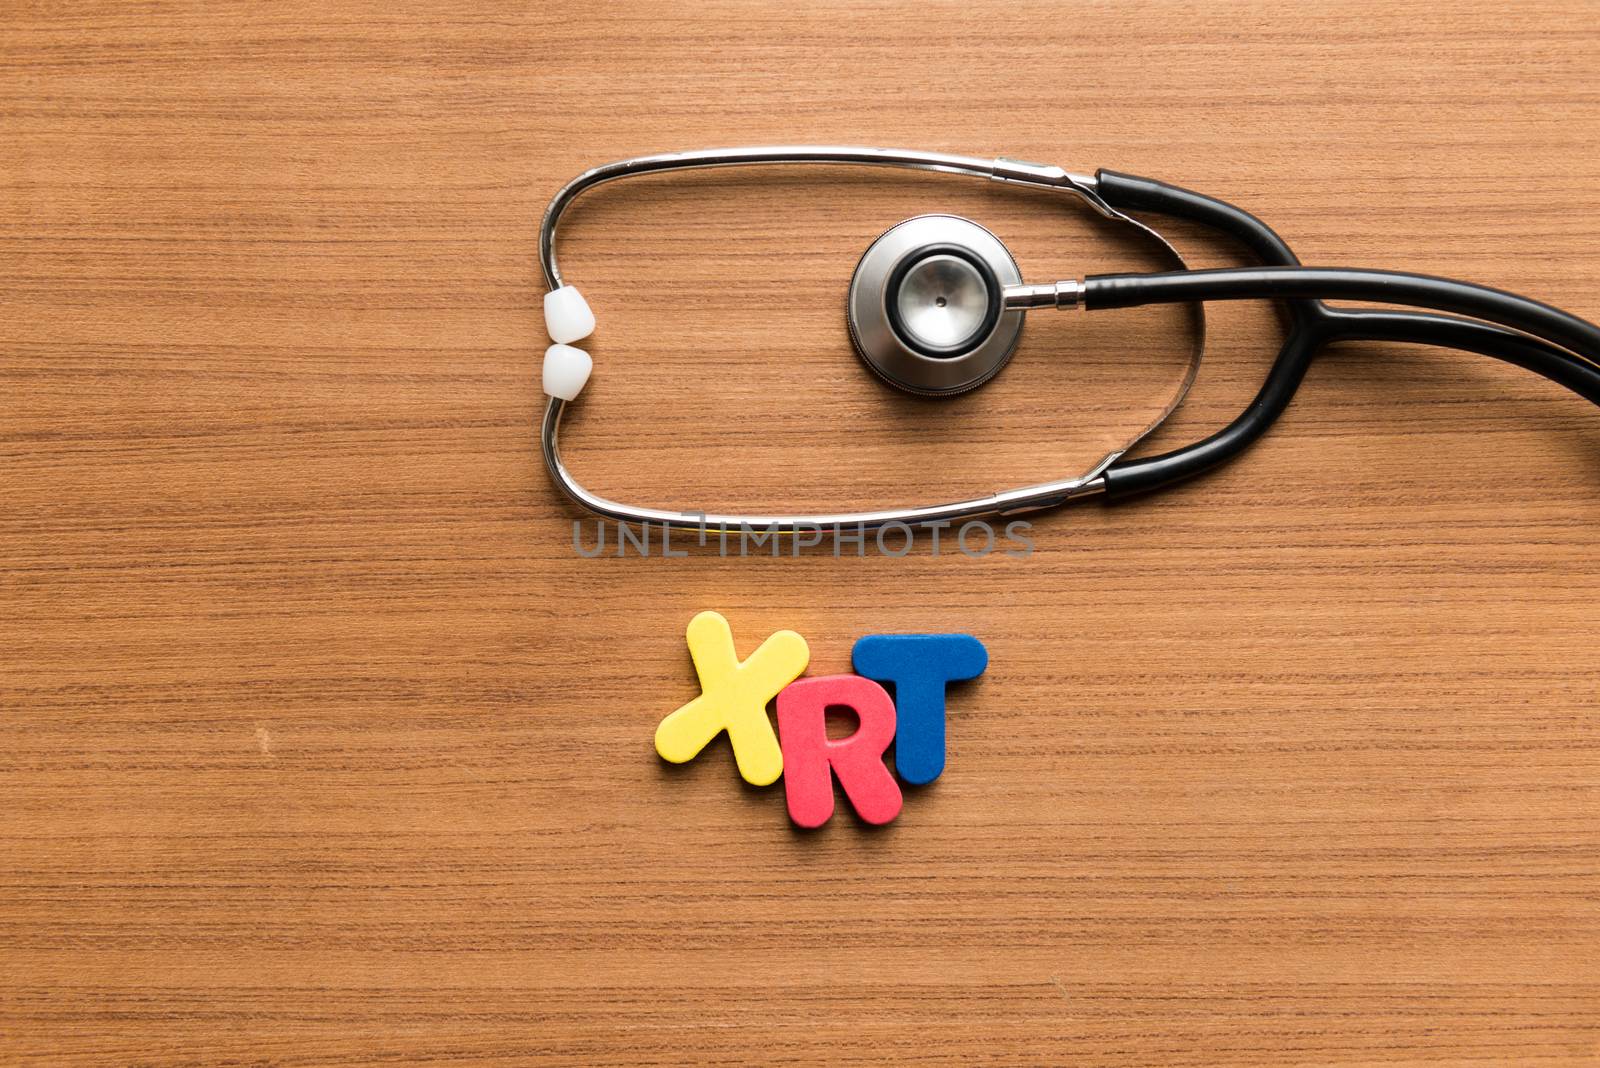 xrt colorful word with stethoscope by sohel.parvez@hotmail.com